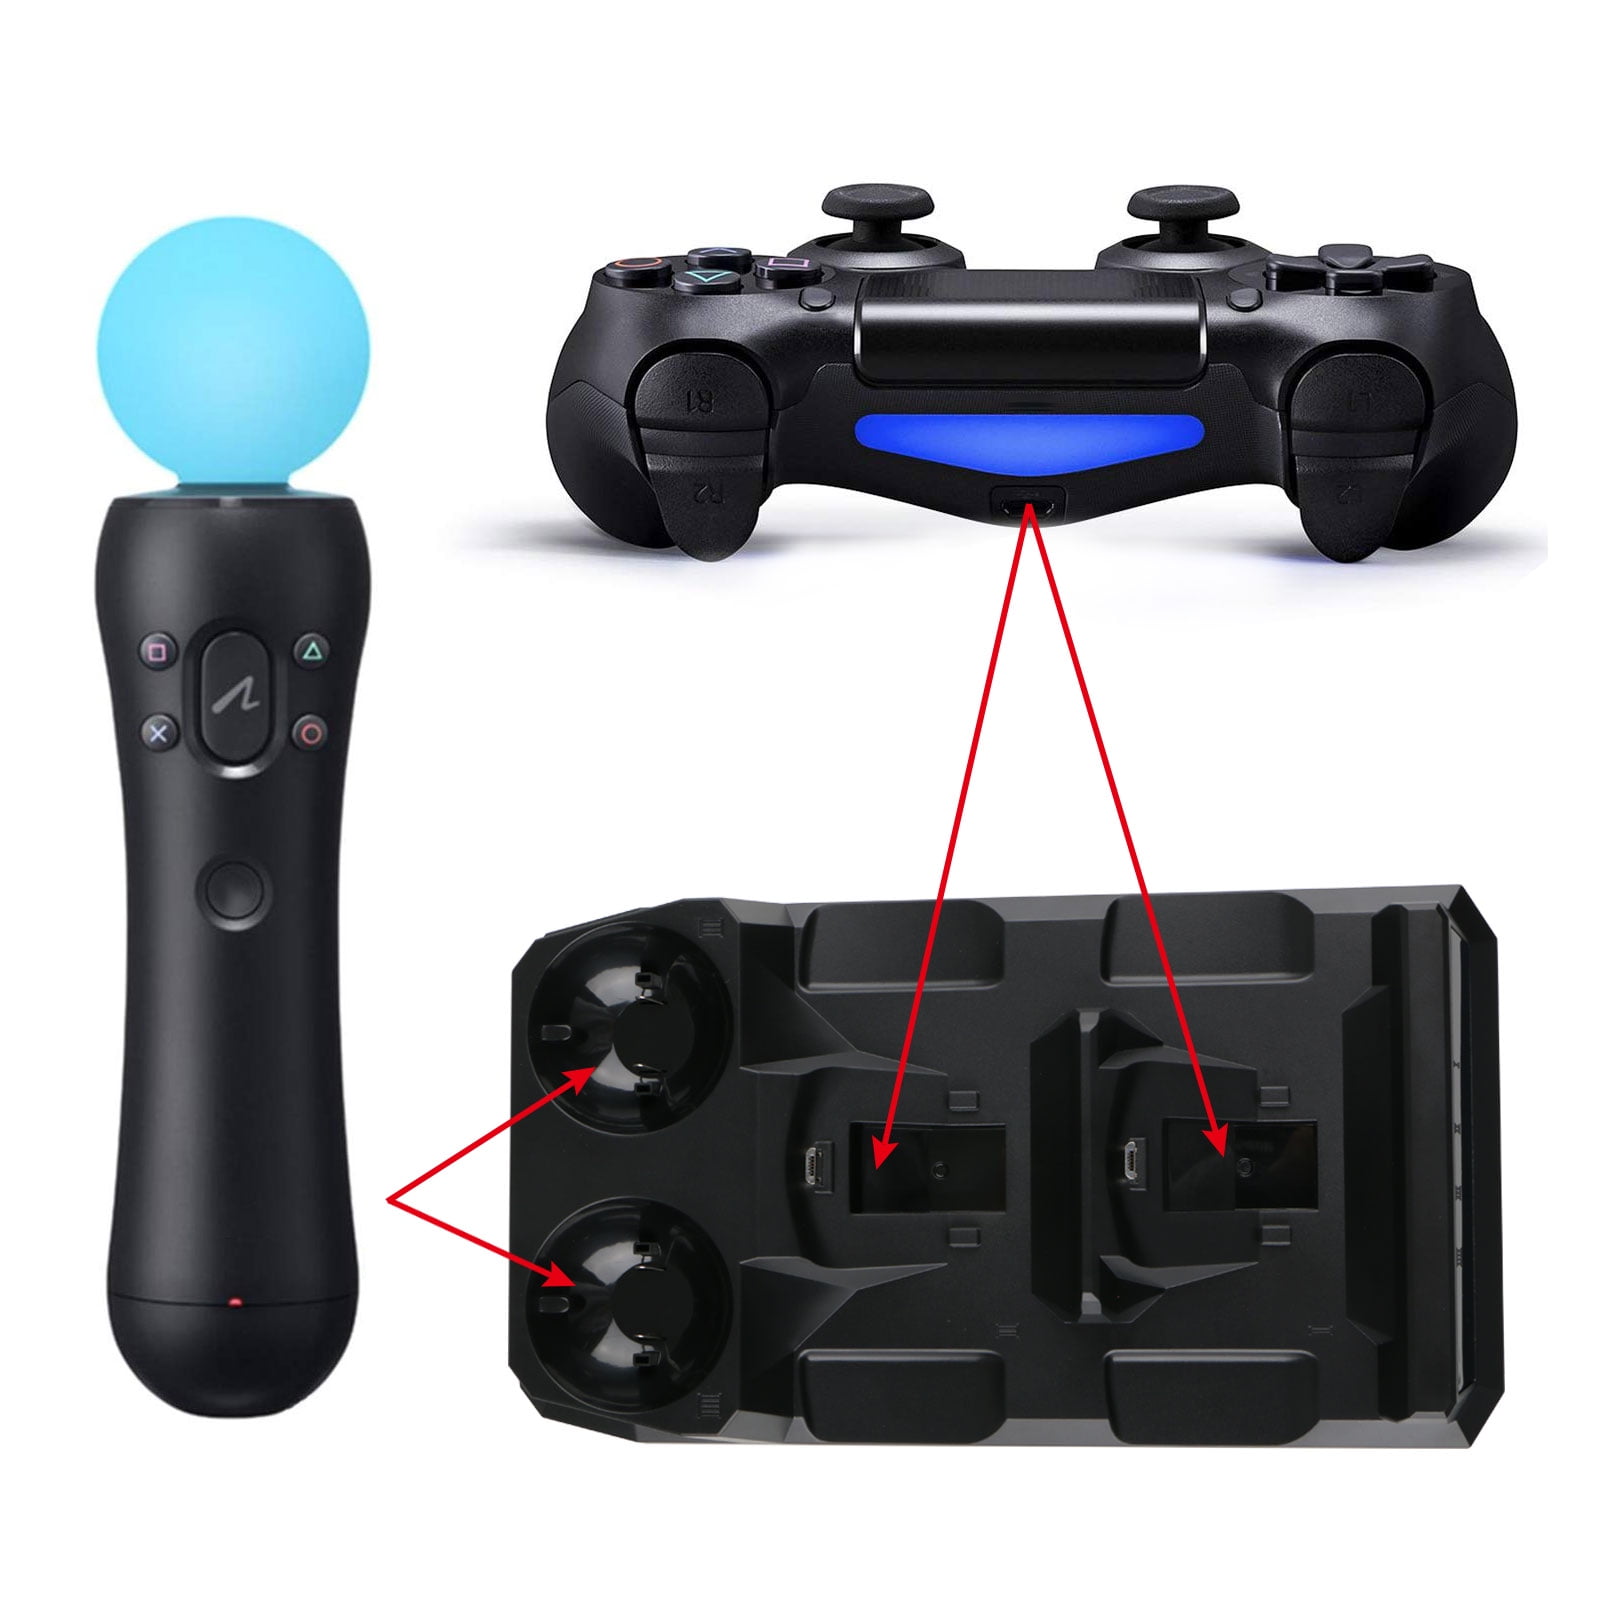 Charger for PS4 VR PS Move, TSV USB Charging Dock Stand Fit for Playstation 4 PS4 PS Move and Pro Controller, 4 in 1 Fast Charging Charger for PS4 Controller -